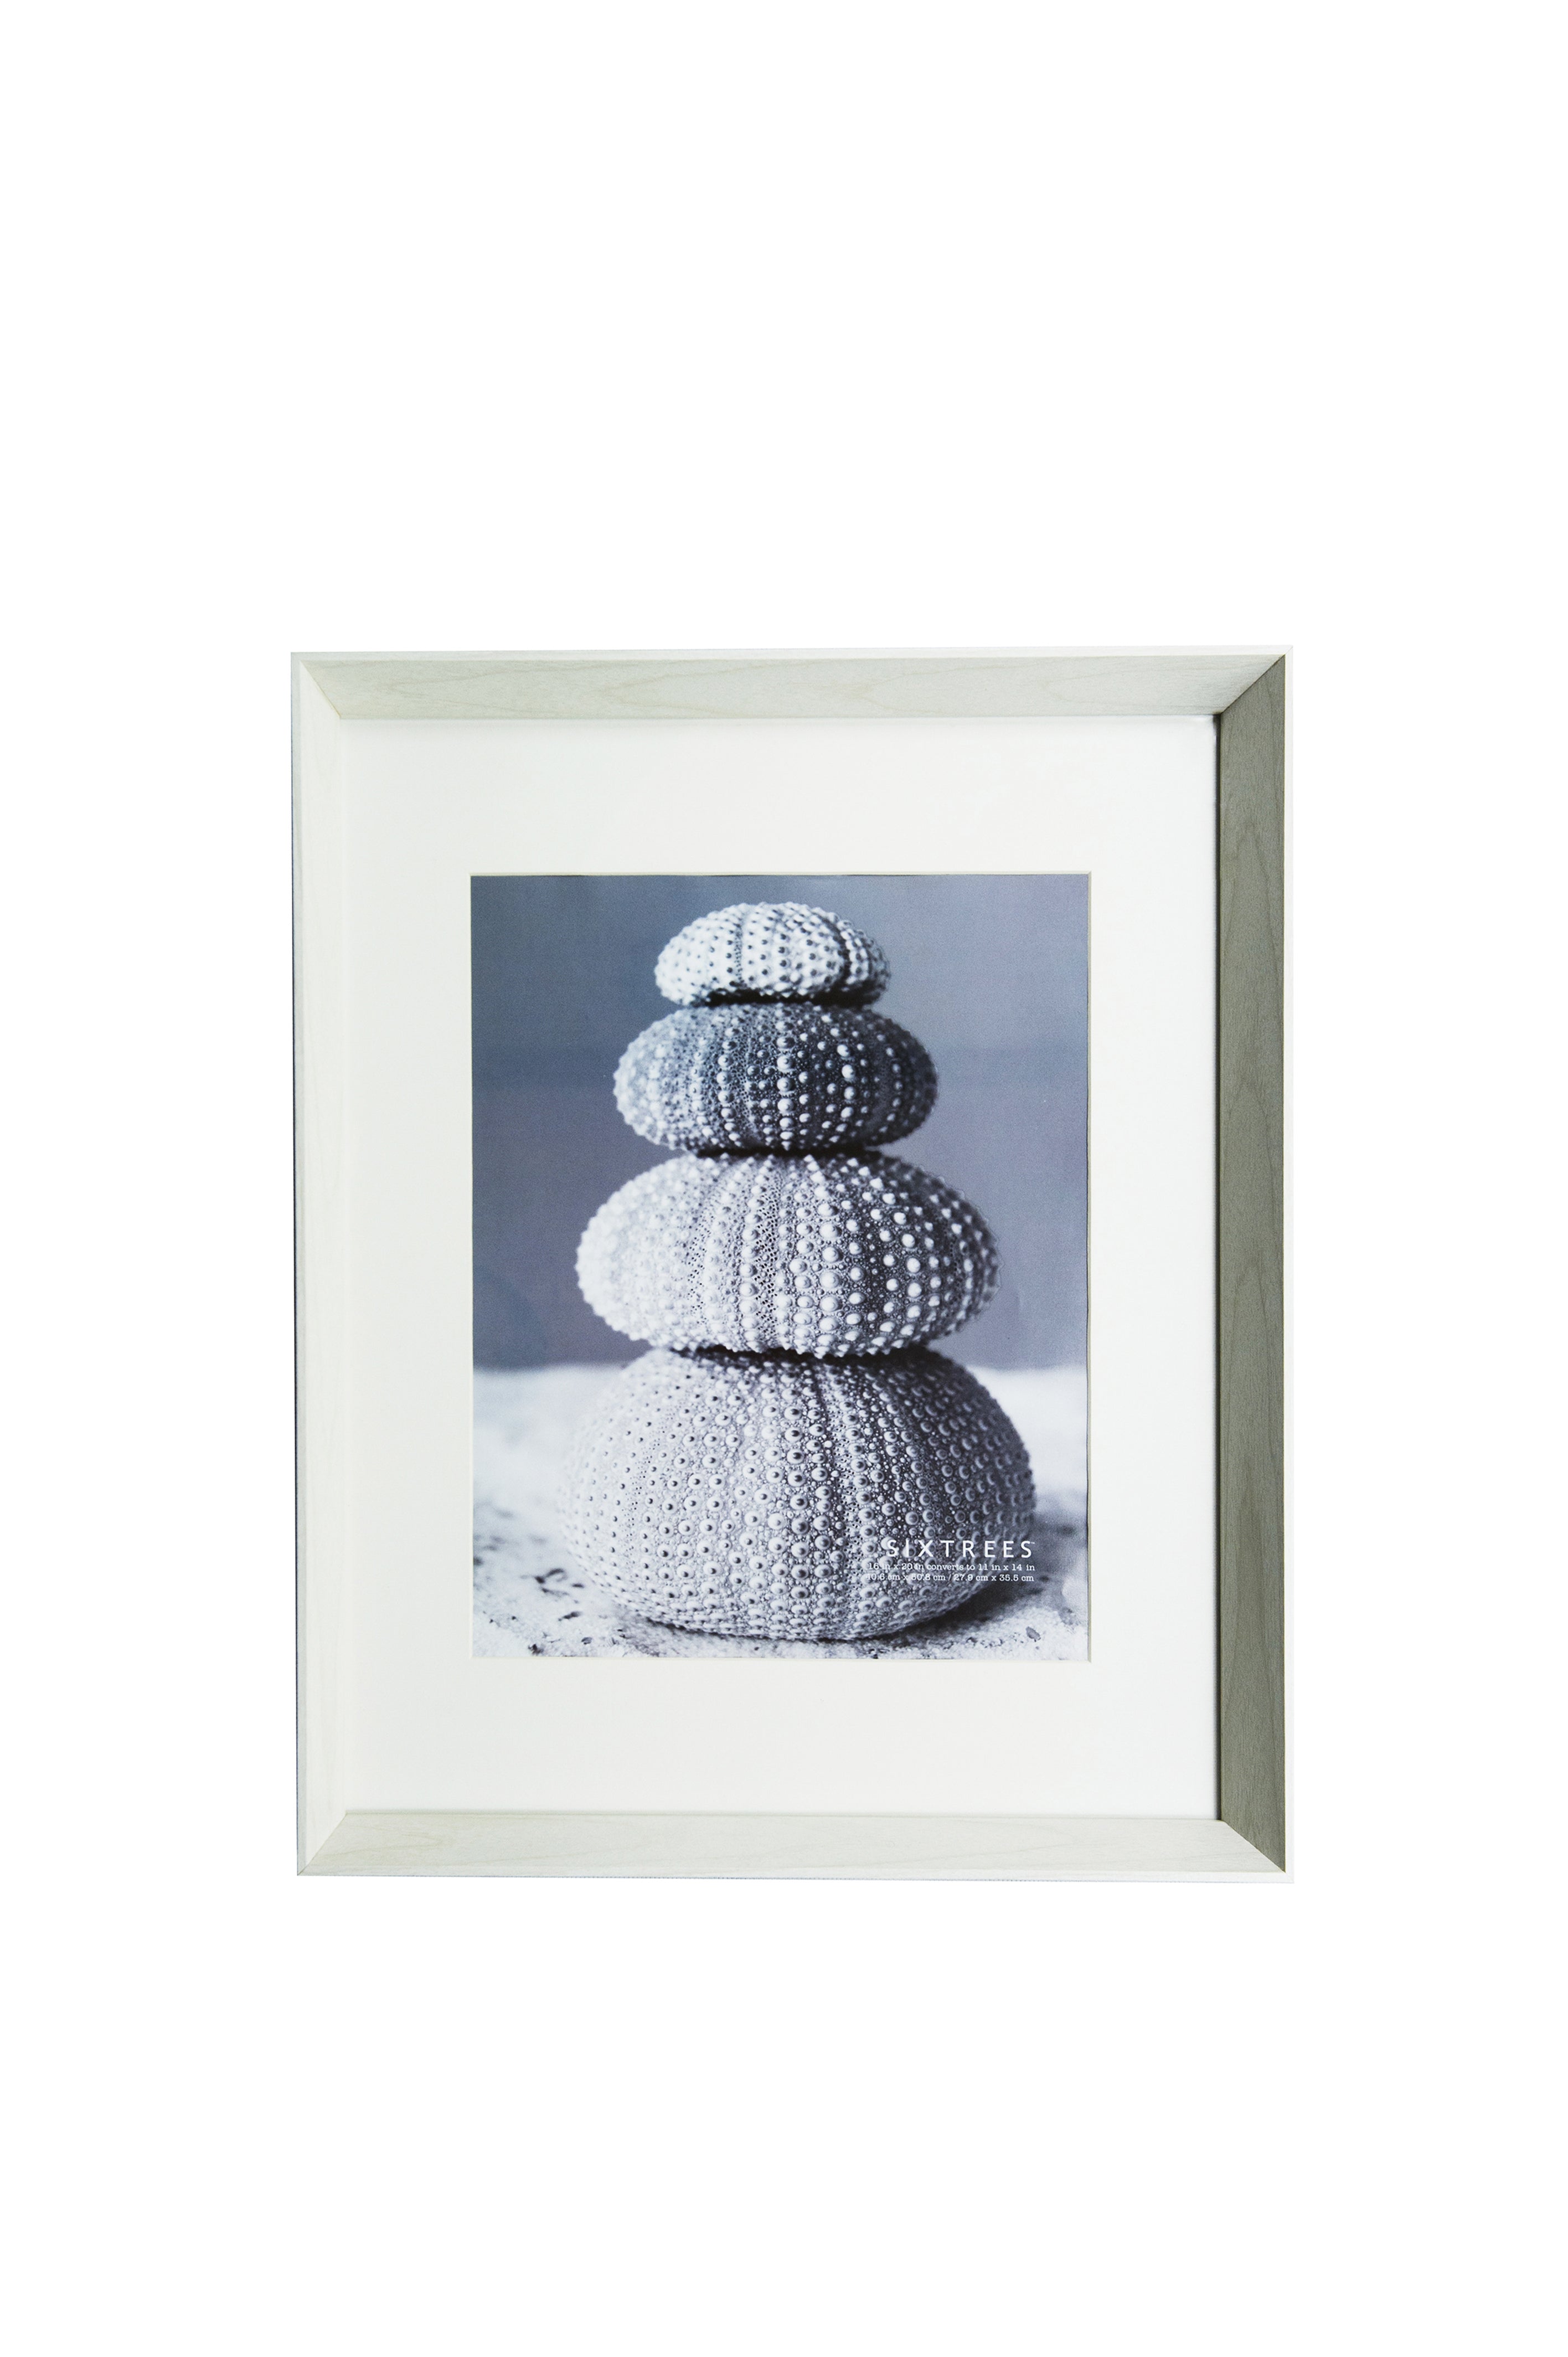 Ethan Wood Matted Picture Frame - 16X20 or 11X14 - Black, White, Grey, –  Sixtrees